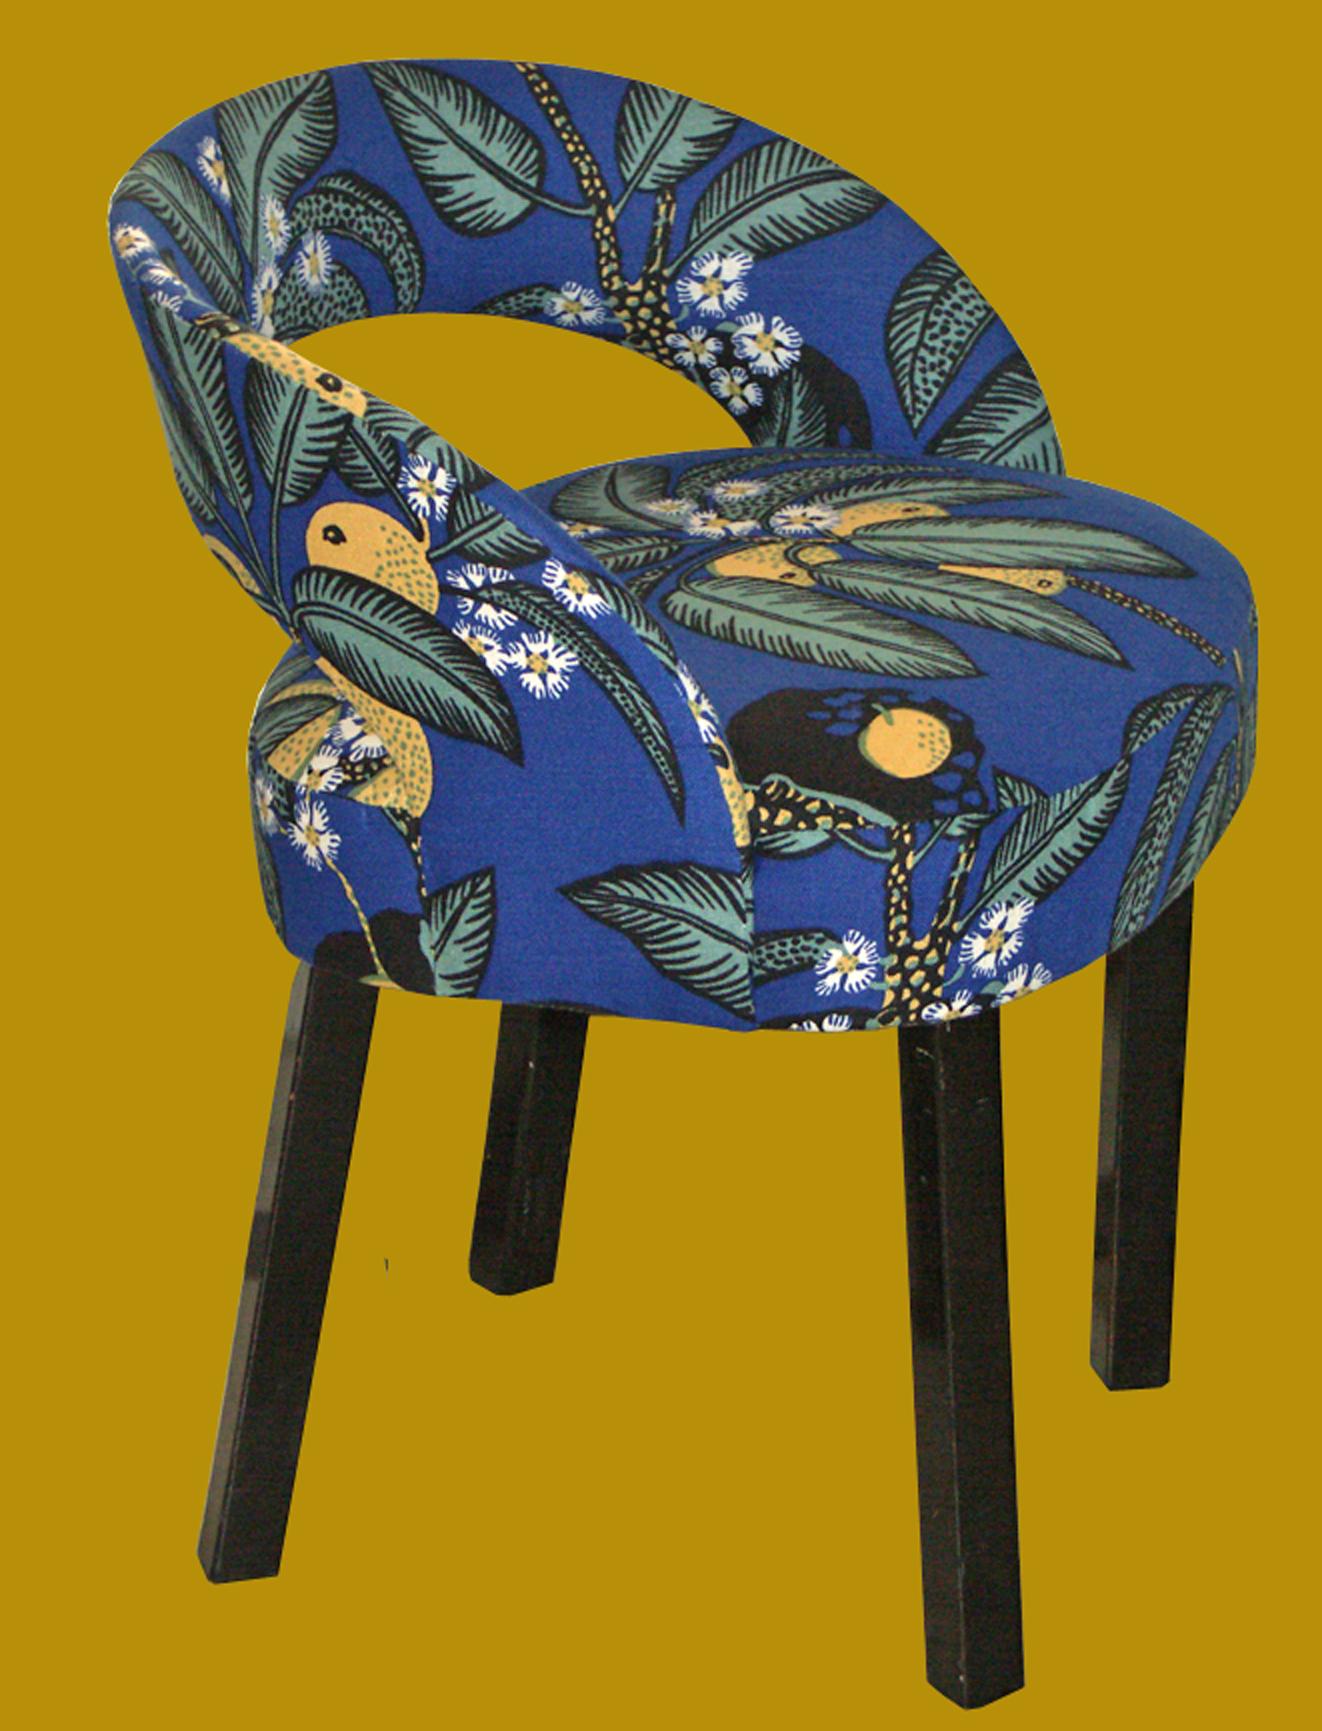 Hand-Crafted Two Original J.Hoffmann Oswald Haerdtl Chairs Art Deco New Fabric by Josef Frank For Sale